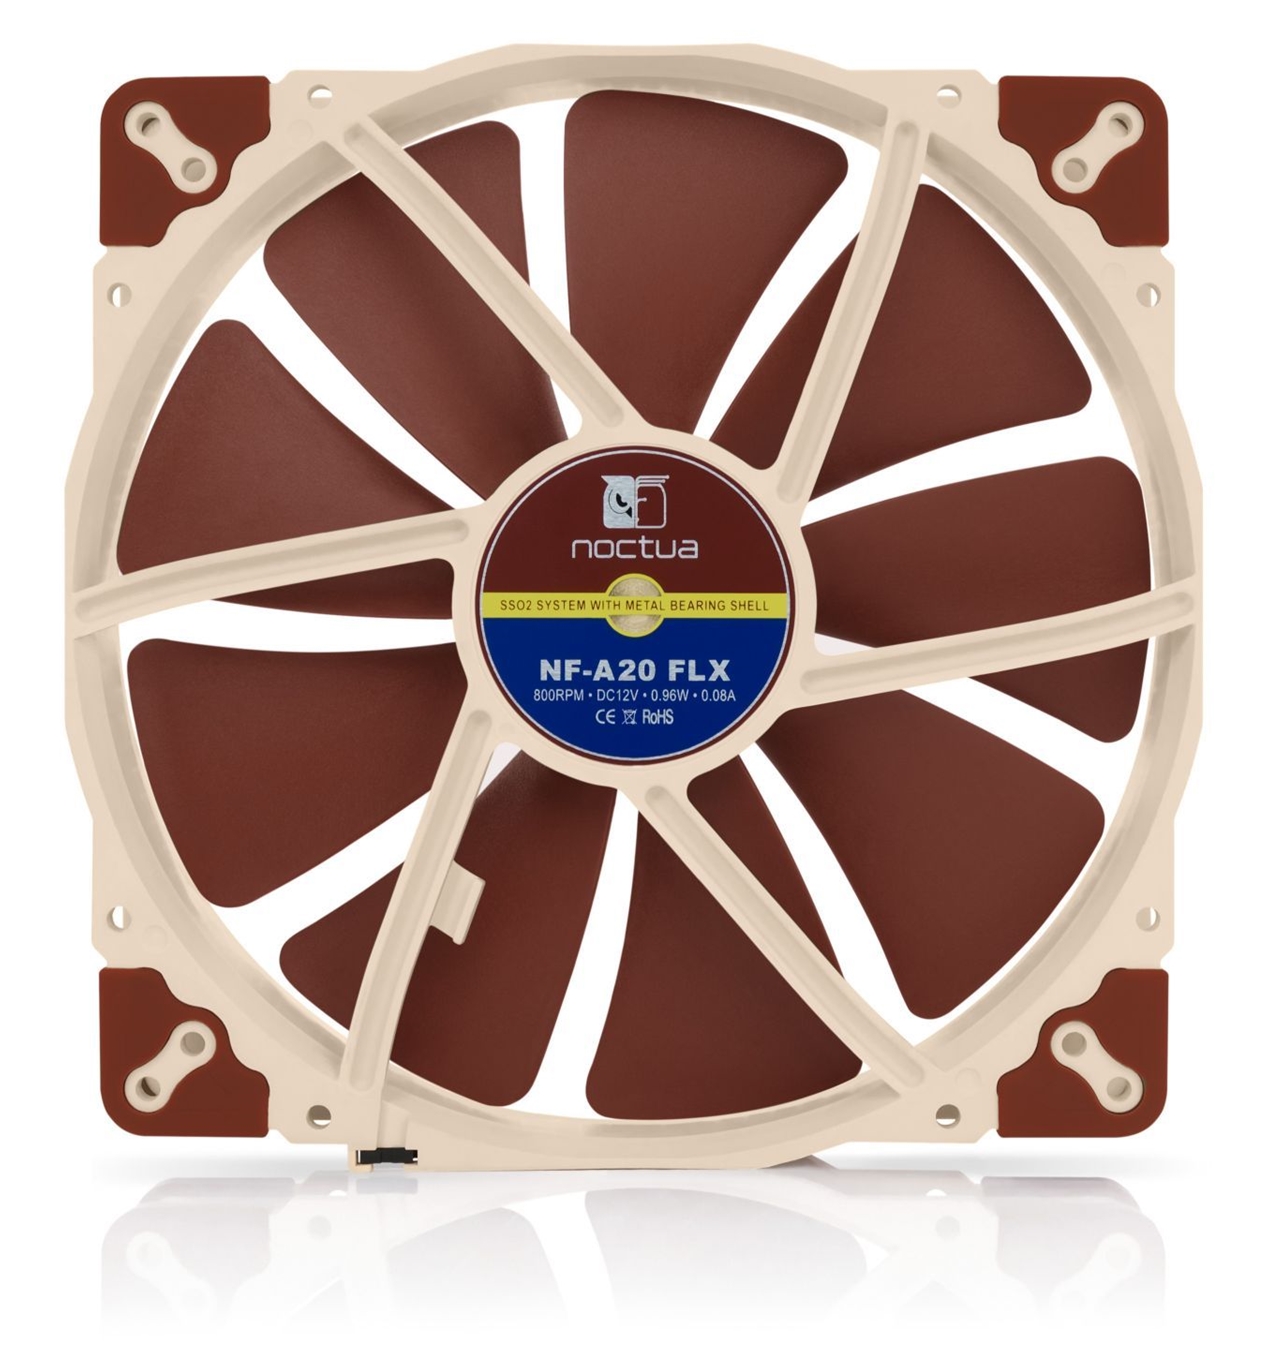 NF-A20 FLX Computer Cooling Fan